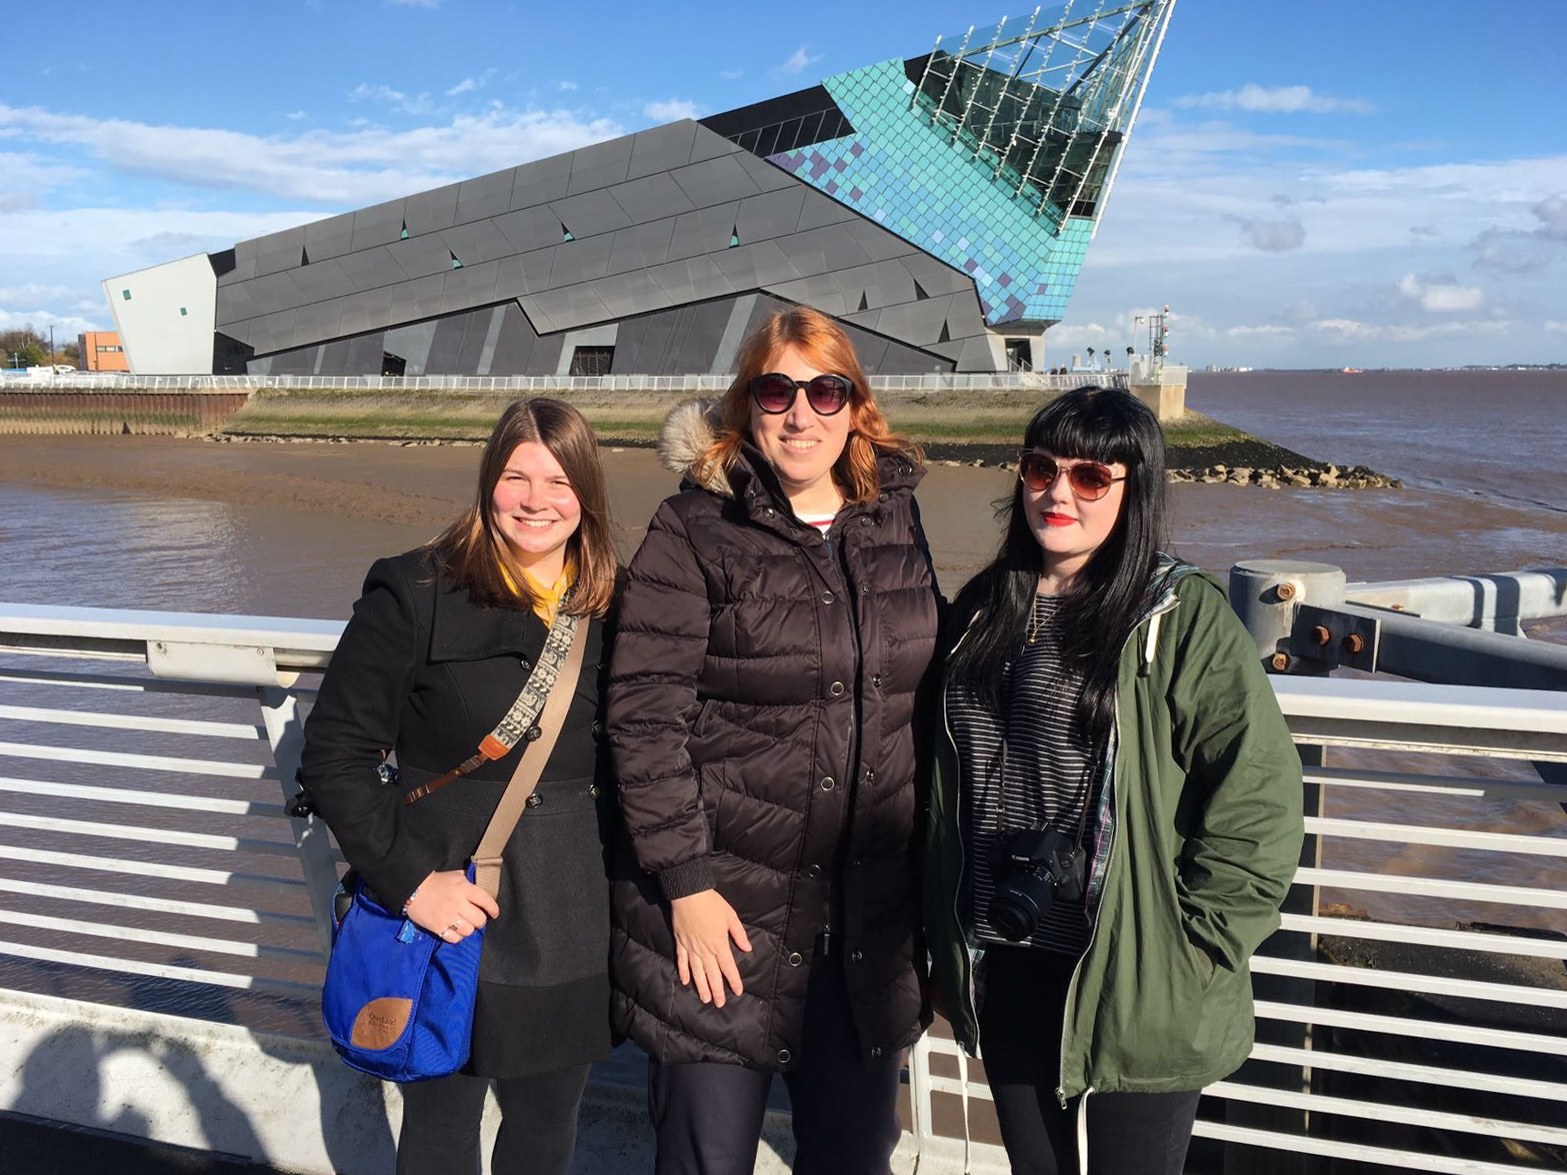 Bloggers in Hull, England